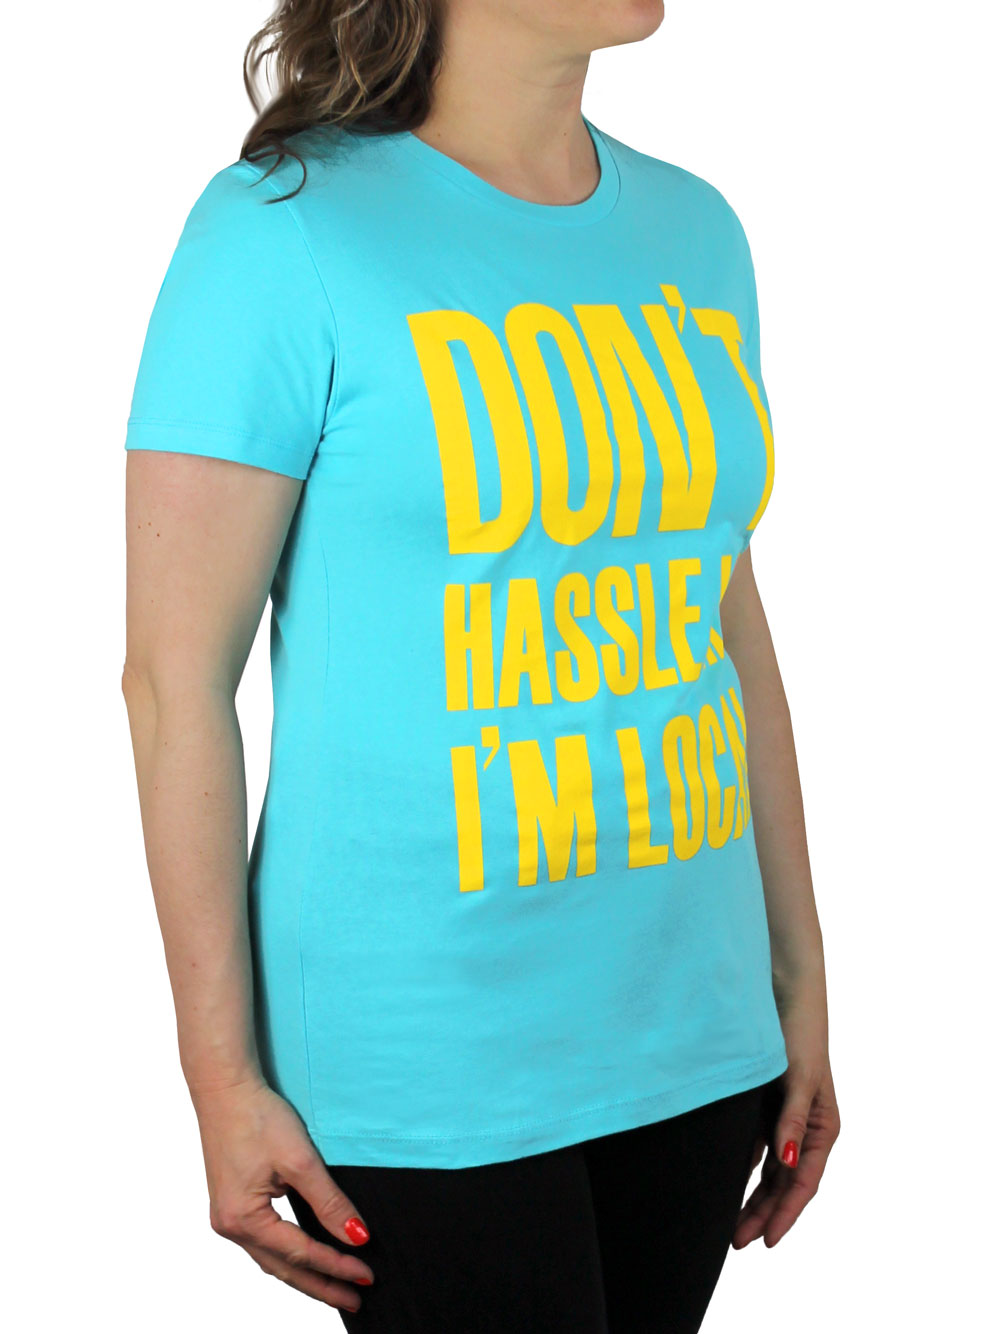 Don't Hassle Me, I'm Local Women's T-Shirt 3/4 View